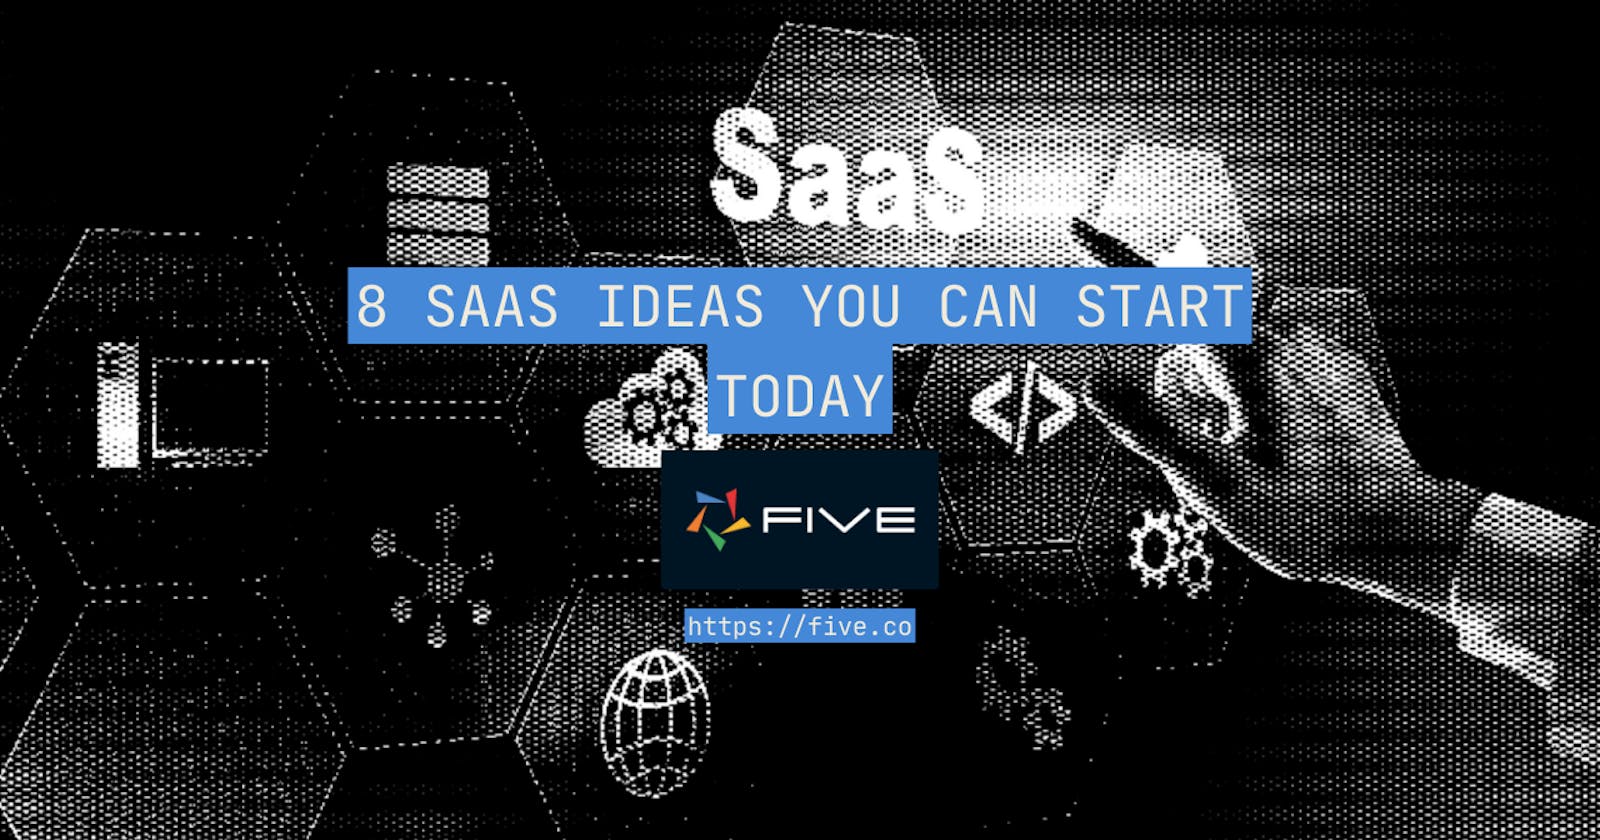 8 SaaS Ideas You Can Start Today